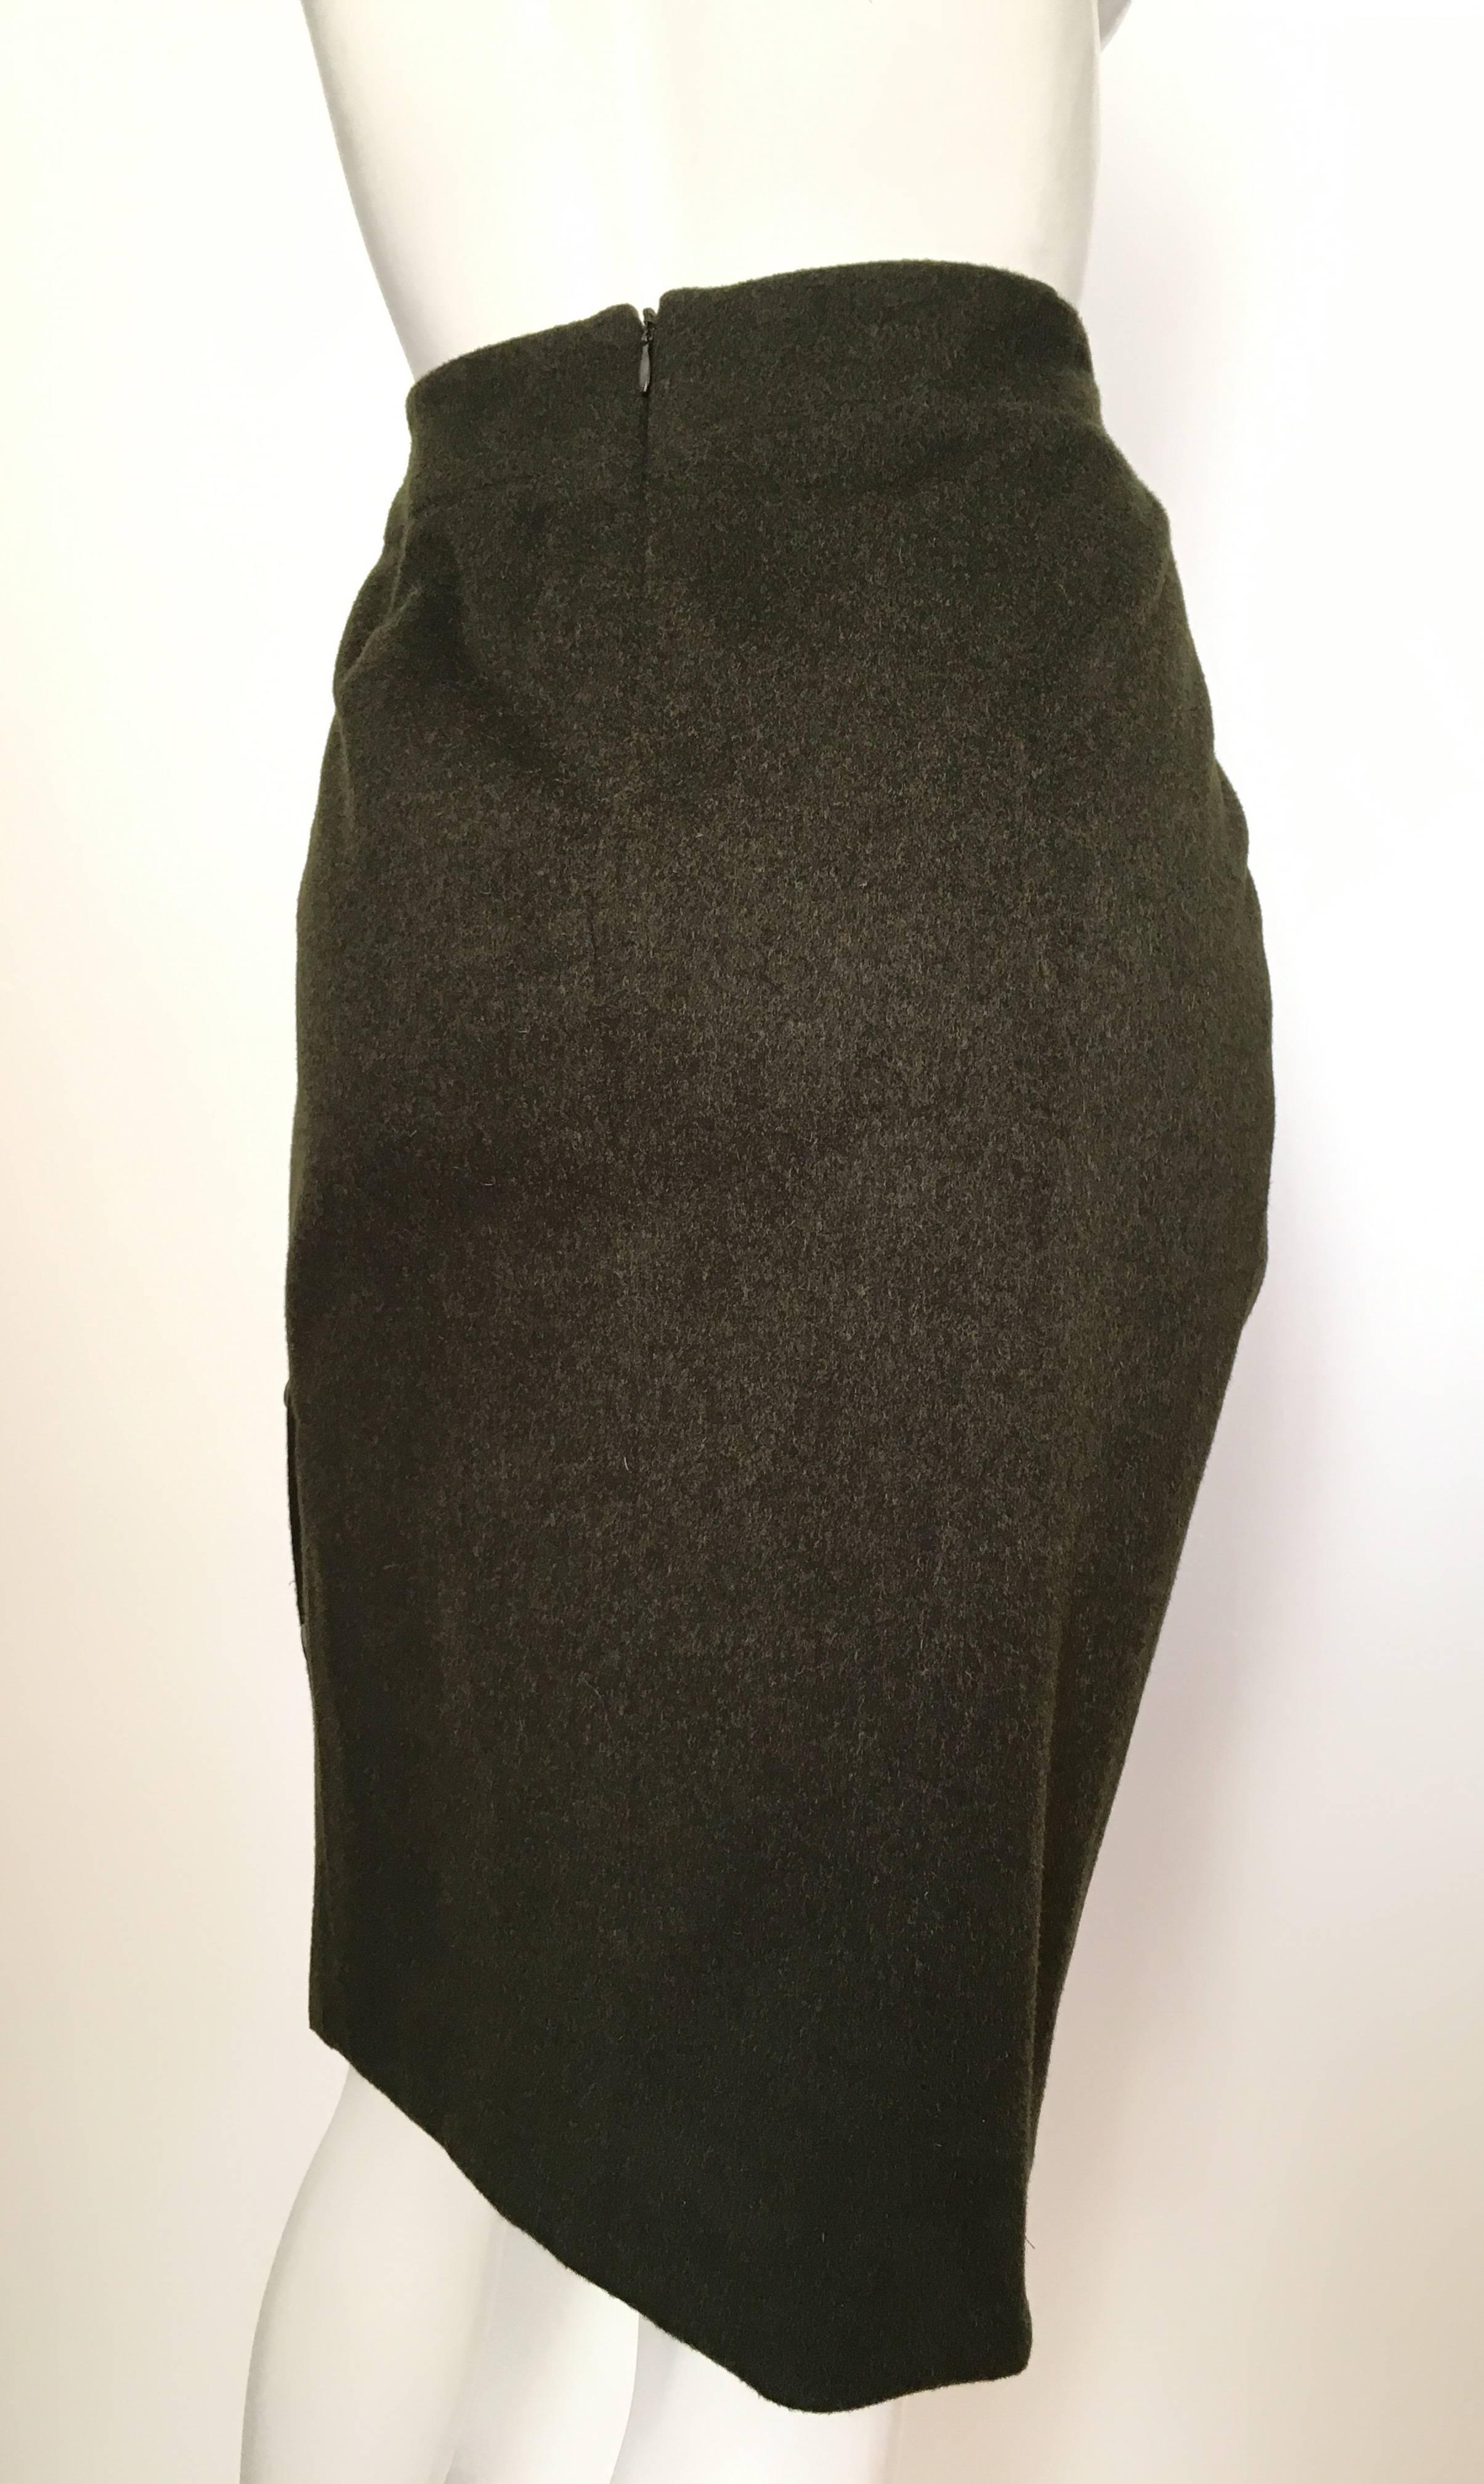 Carolina Herrera for Saks Olive Brushed Wool Skirt Size 10 Made in Italy. In Excellent Condition For Sale In Atlanta, GA